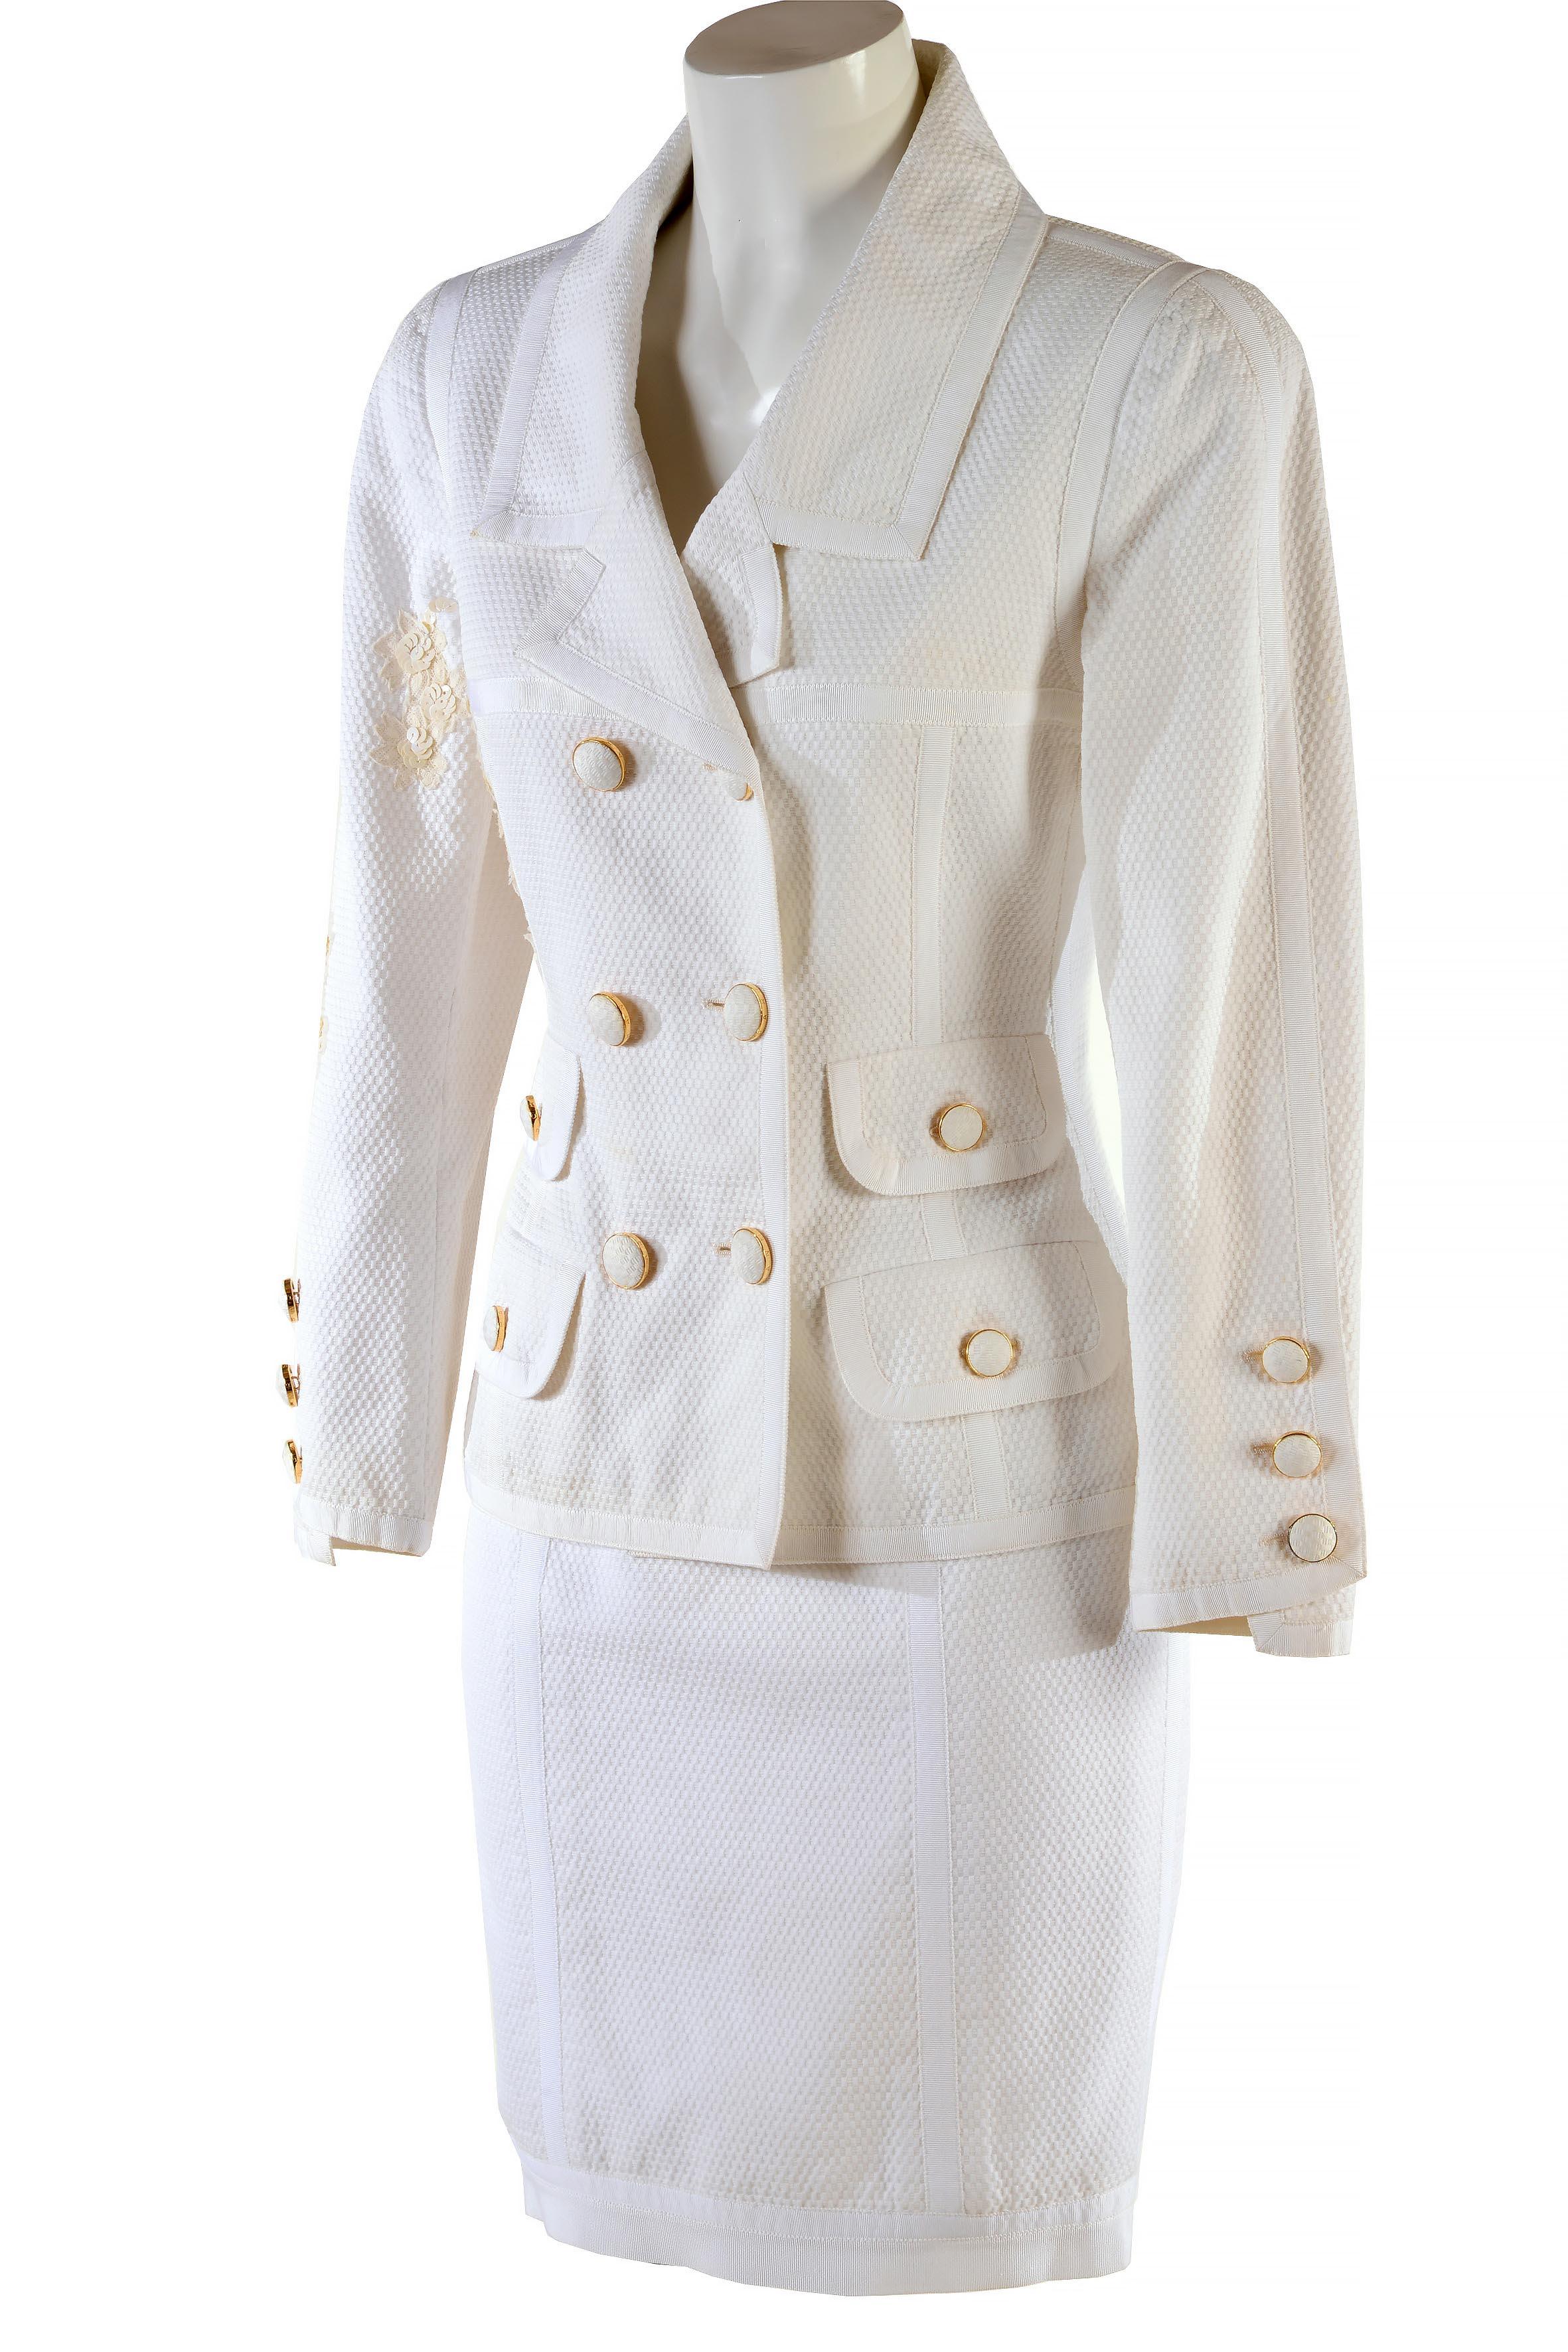 Chanel Boutique vintage suit from the late 80s
White piqué cotton 
Double-breasted jacket with buttons covered in the same fabric. Incrustations of sequins and lace flowers.
Silk lining
Size and composition label not present
Size XS
Flat